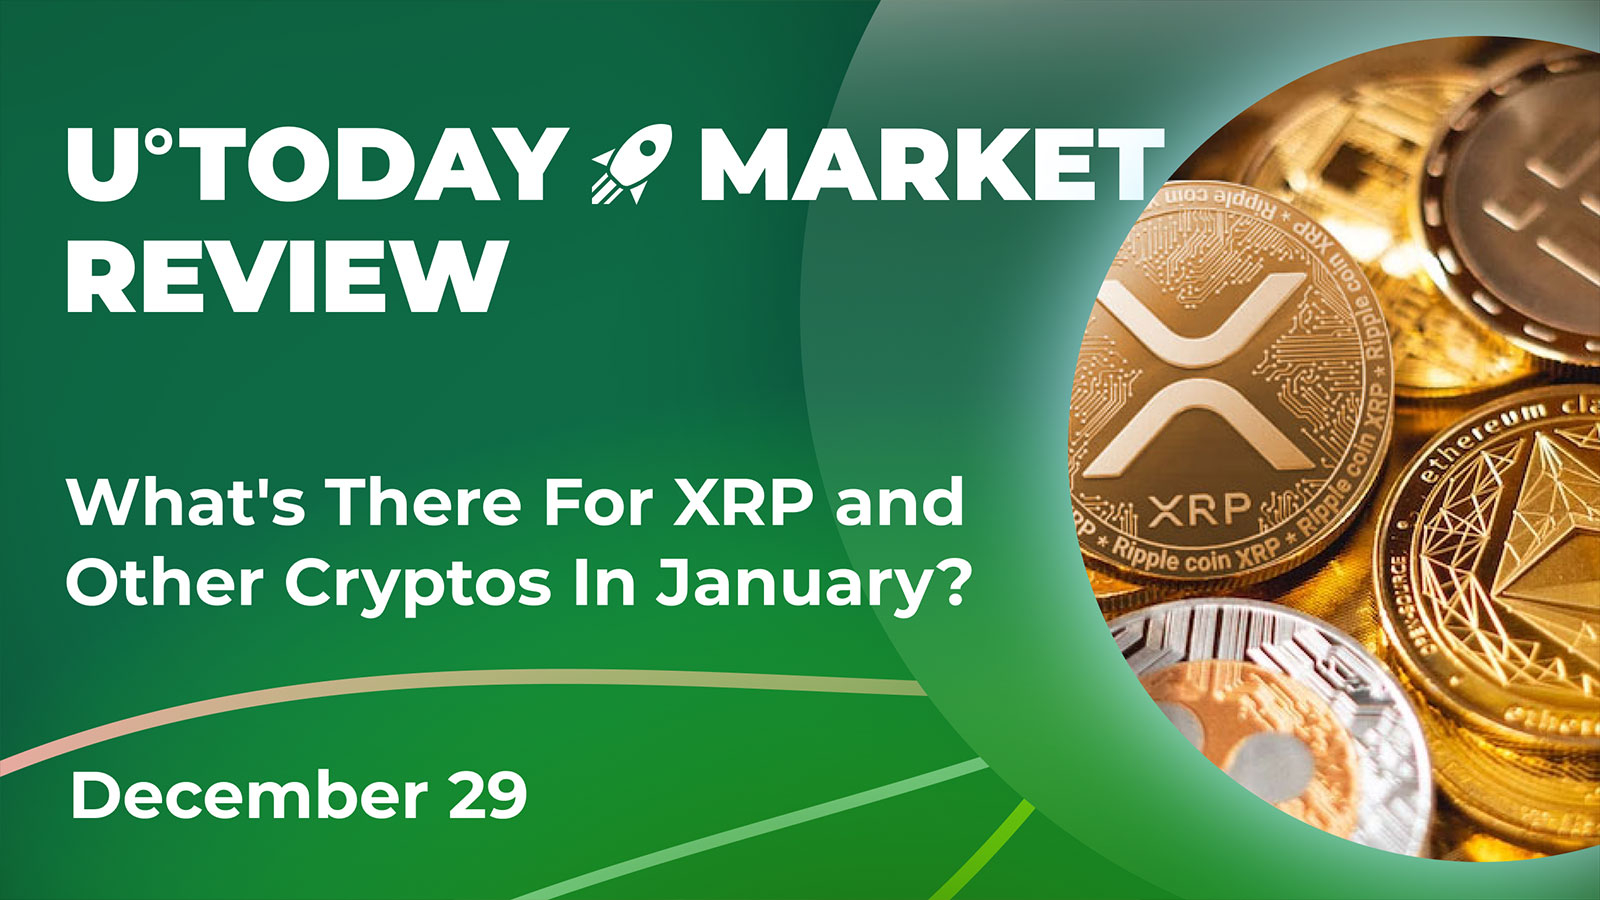 What Are XRP and Other Cryptos in for in January? Crypto Market Review, Dec. 29